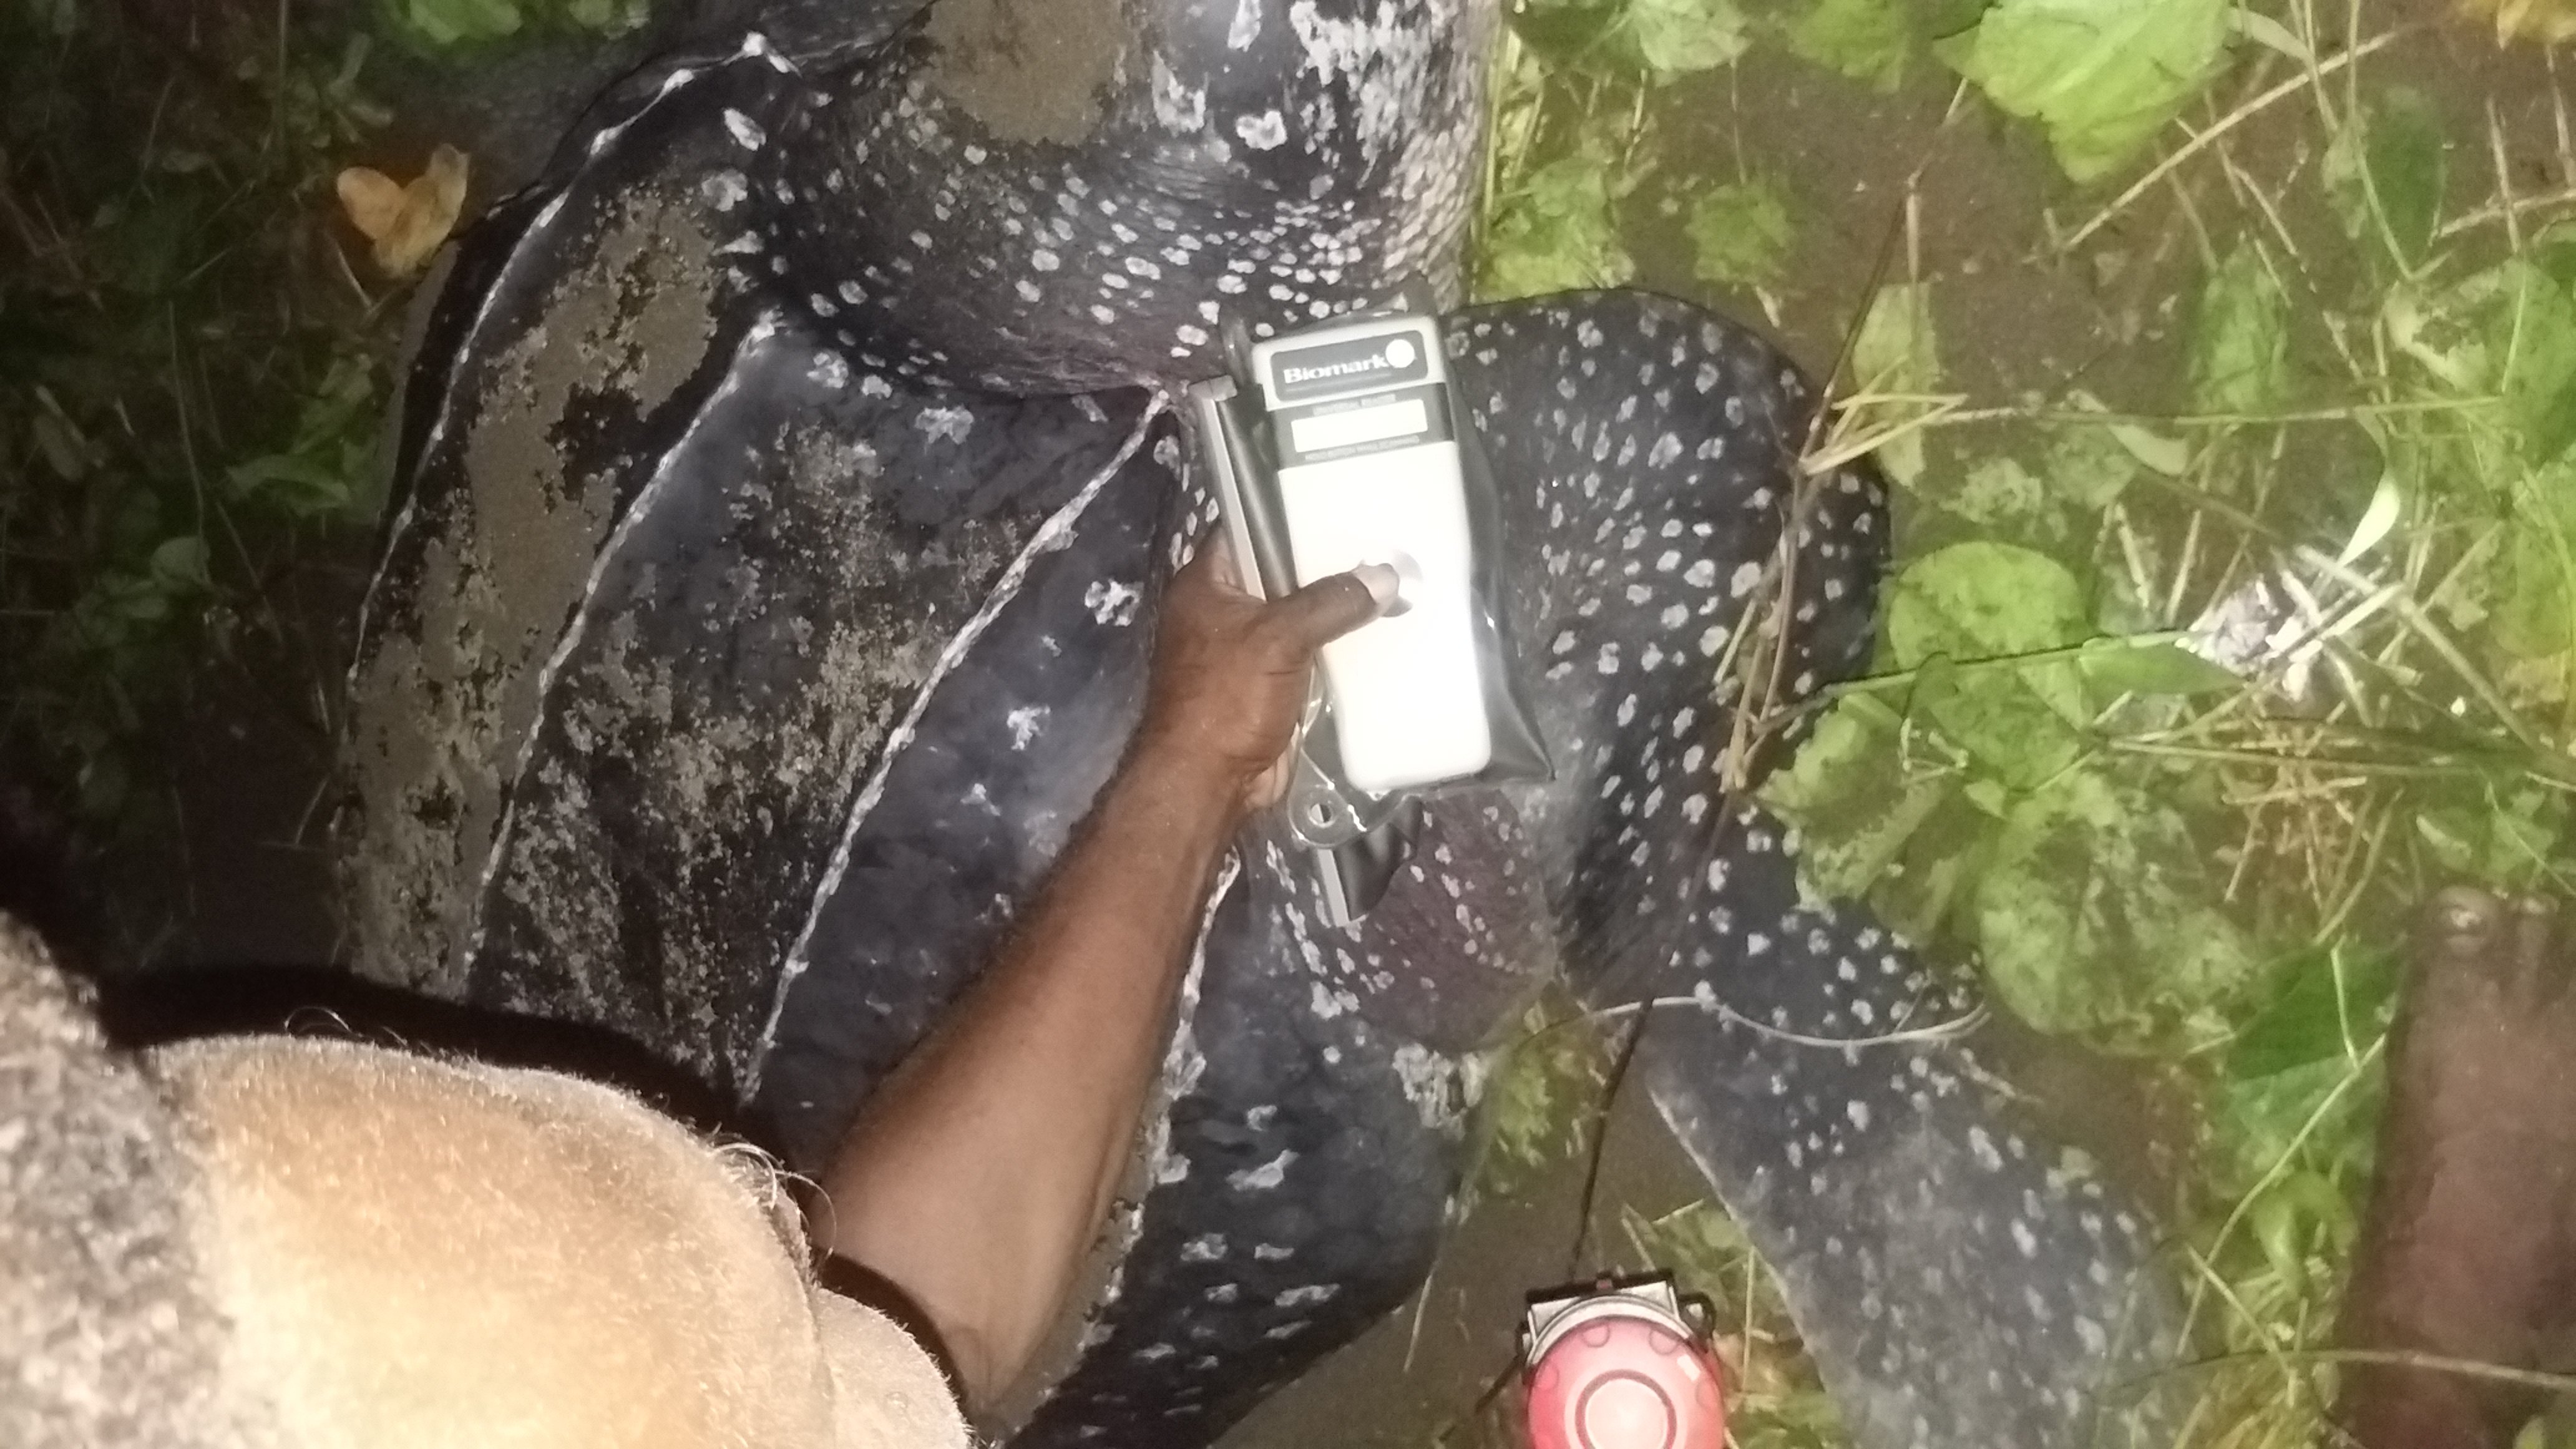 A ranger conducting a DNA test on one of the leatherback turtles